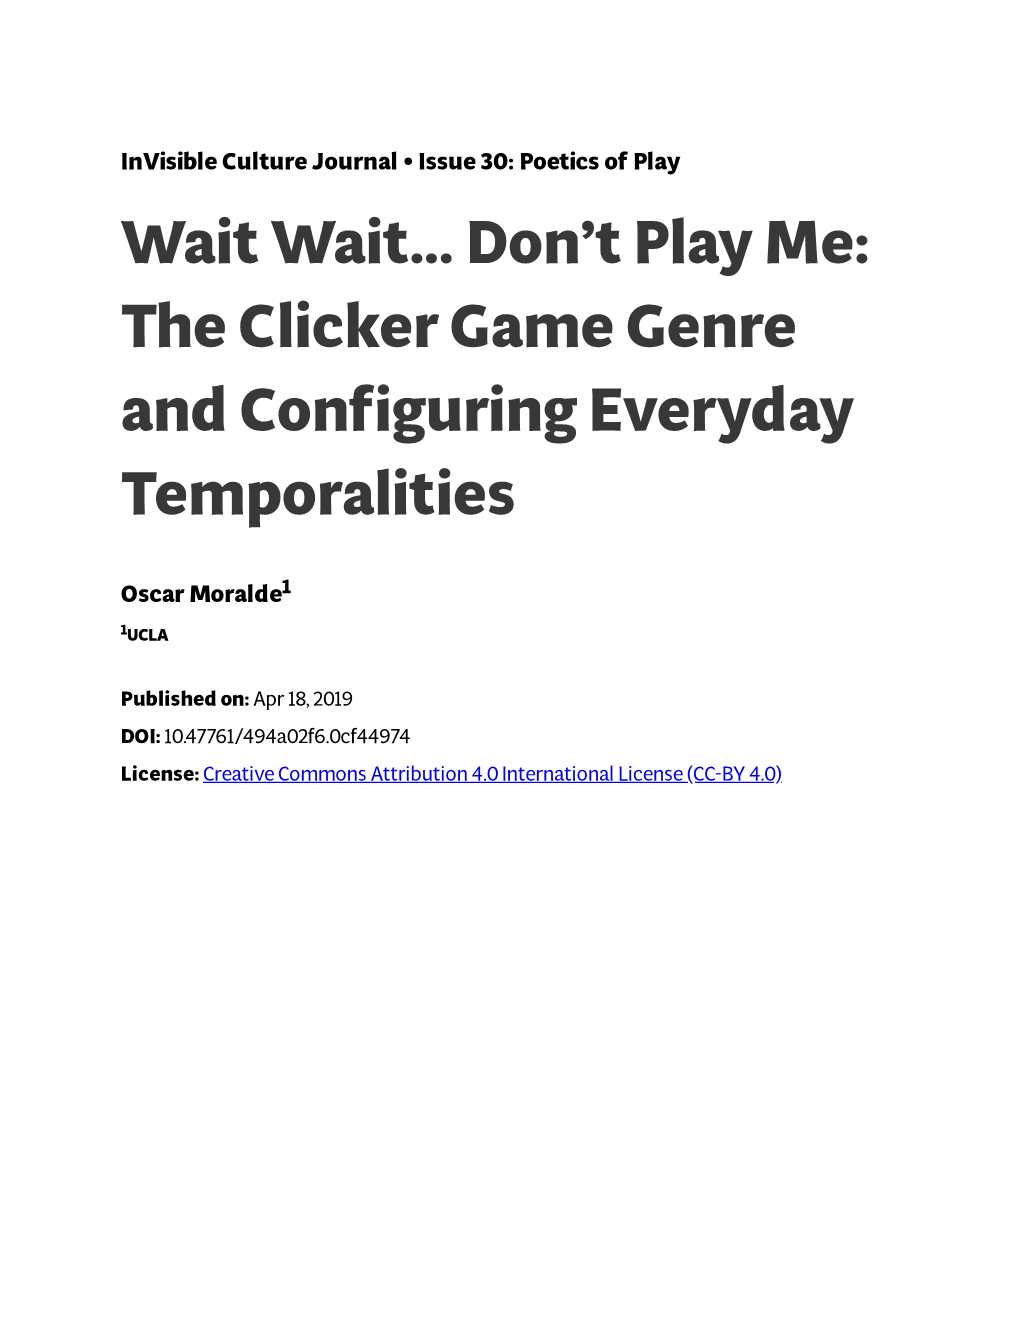 Wait Wait& Donˇt Play Me: the Clicker Game Genre and Configuring